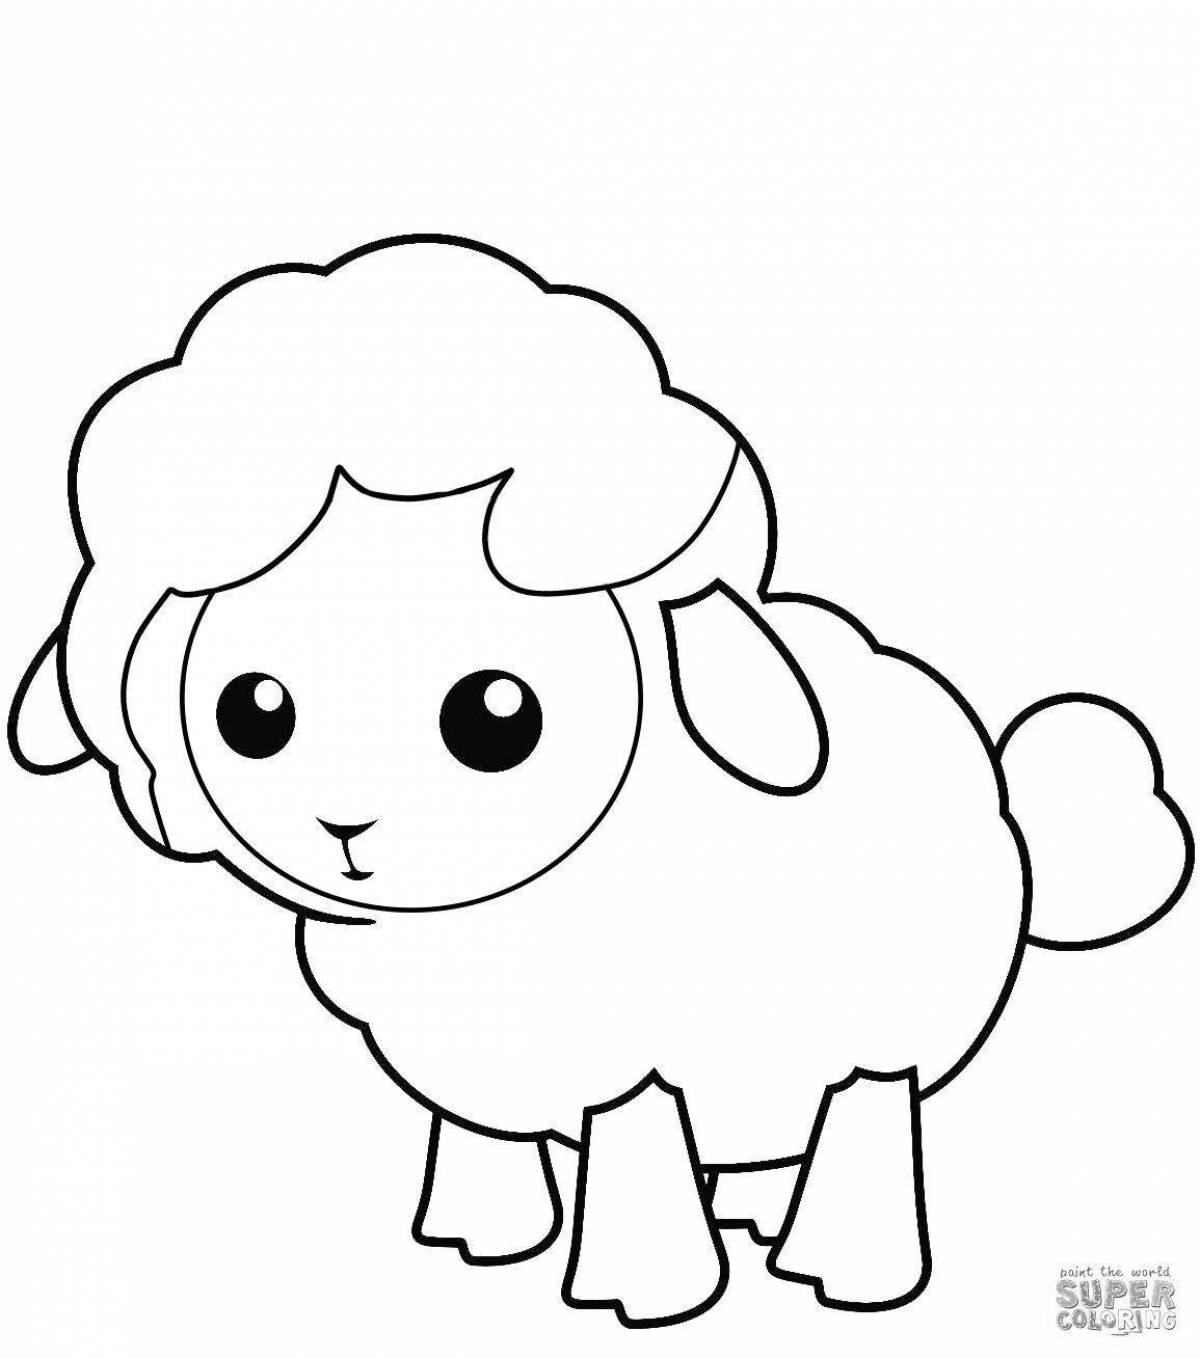 Glowing sheep coloring pages for kids